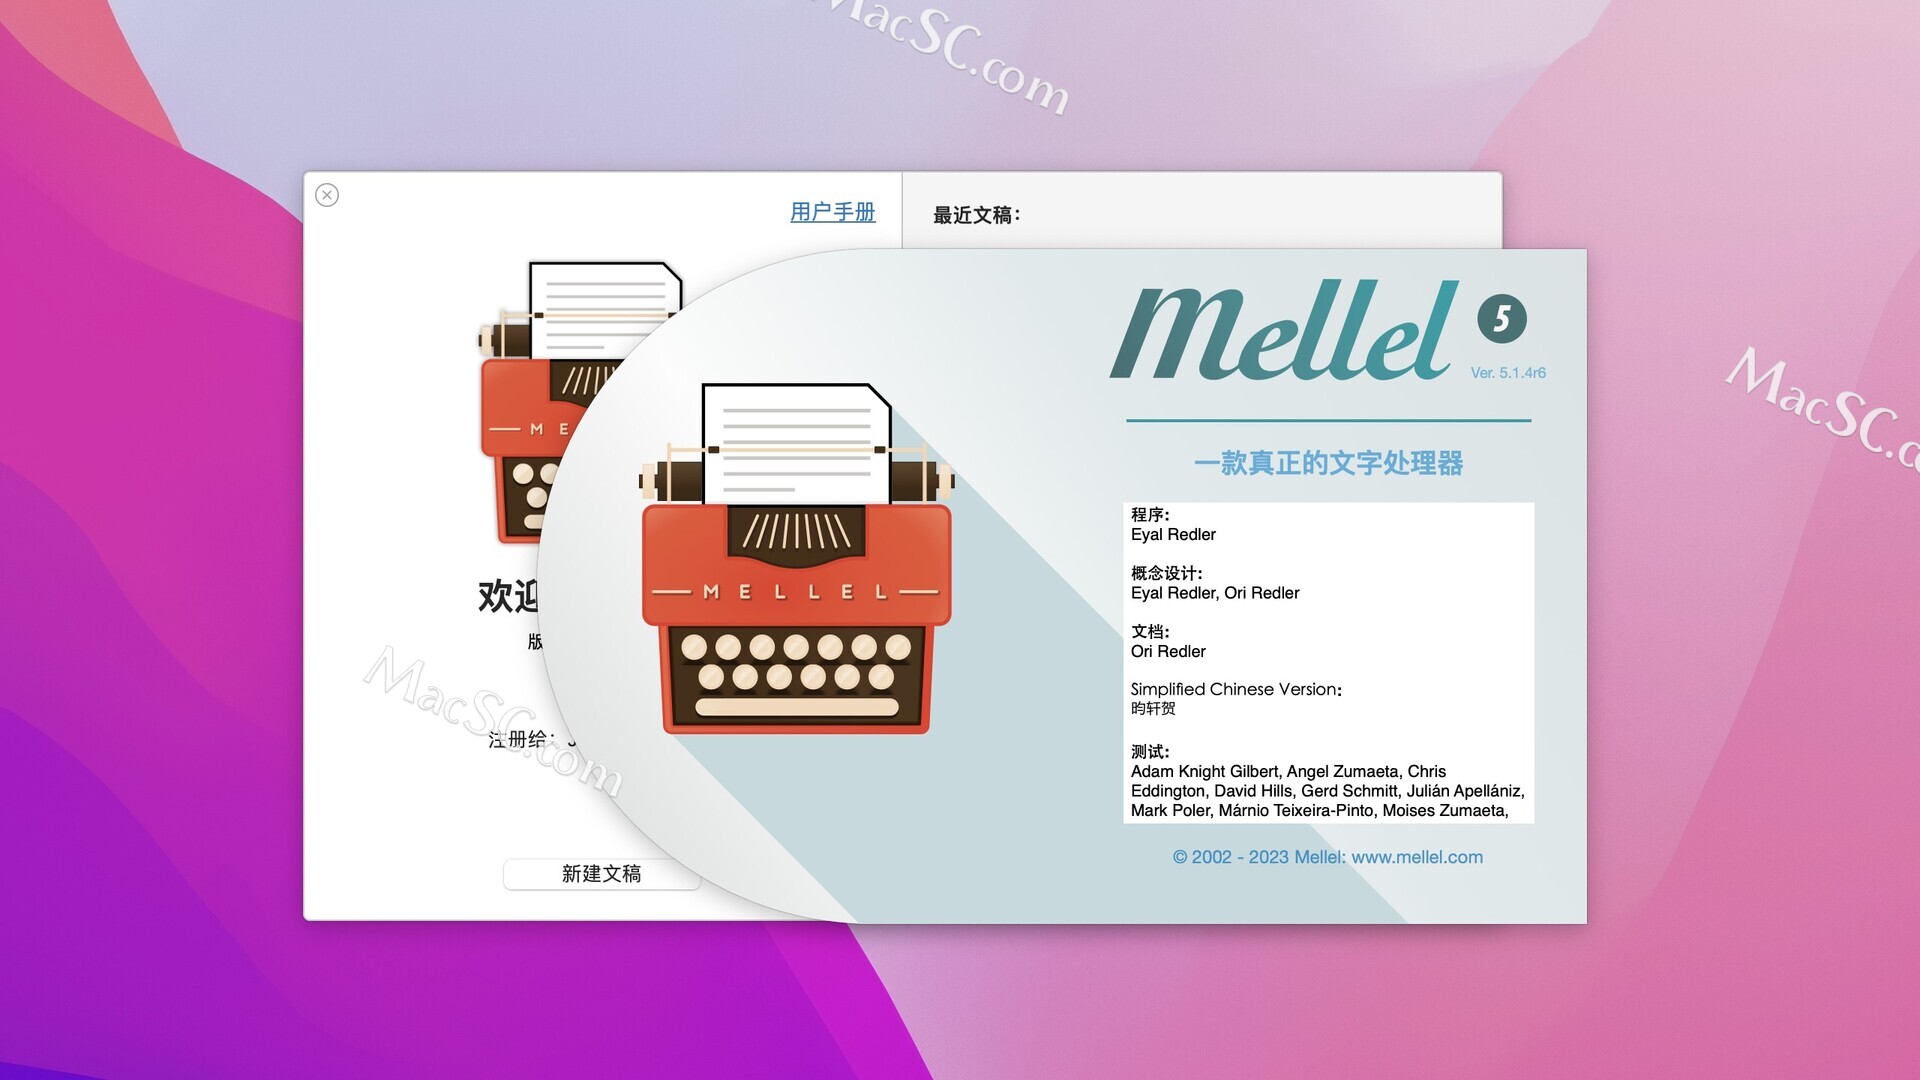 Mellel 5 instal the new version for ios